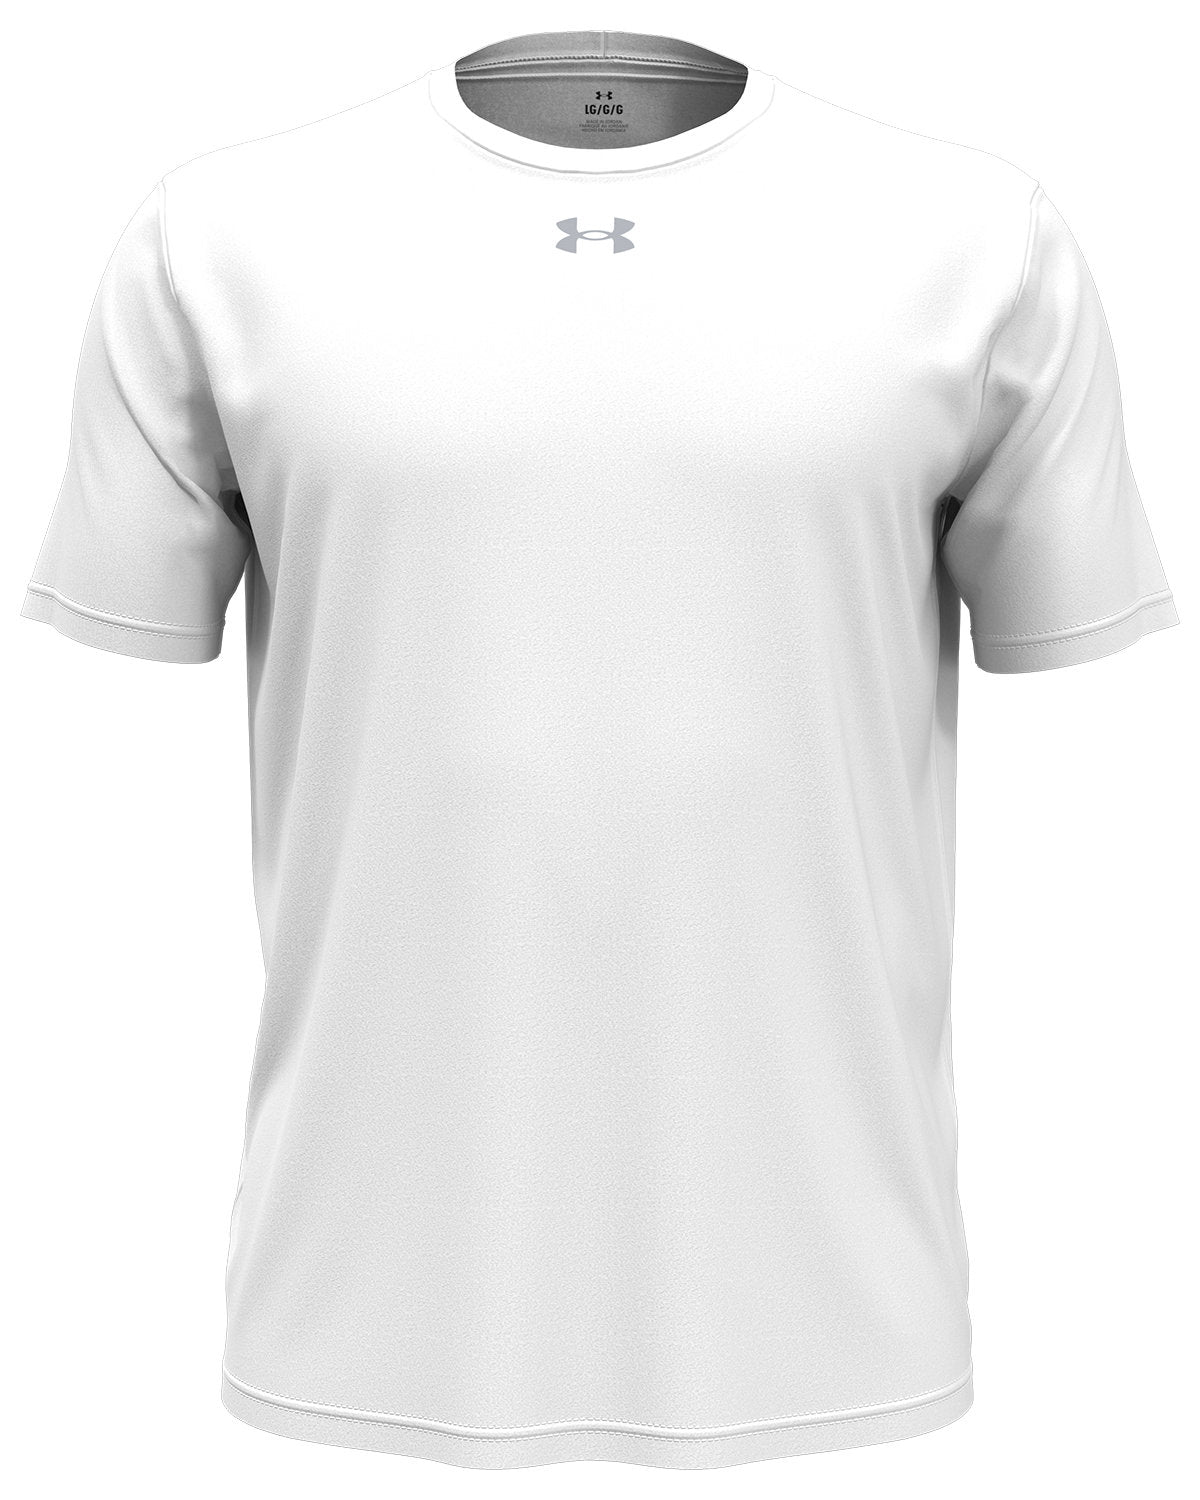 Under Armour 100% Polyester White Active T-Shirt Size X-Small